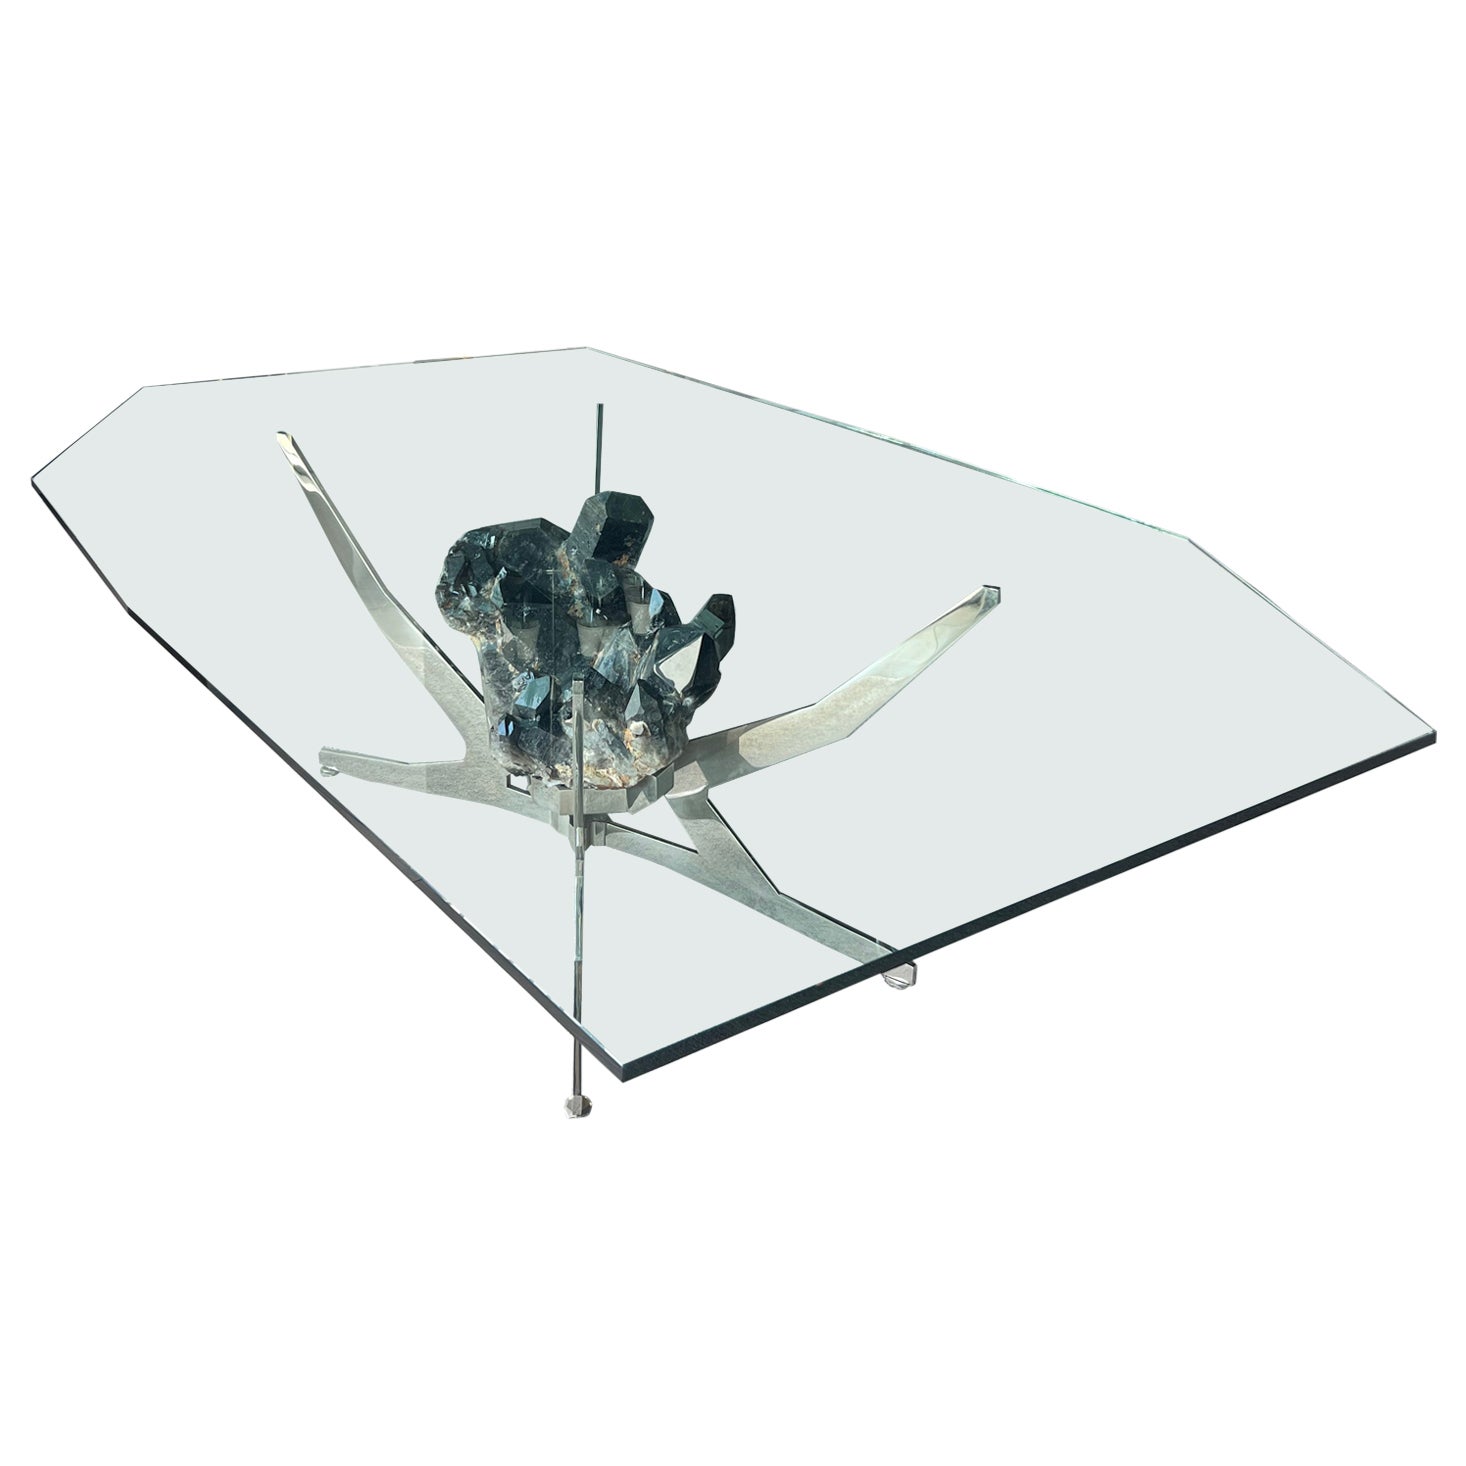 Smokey Quartz Dining Room Table By Giuliano Tincani (ITALY)Nickel with Glass Top For Sale